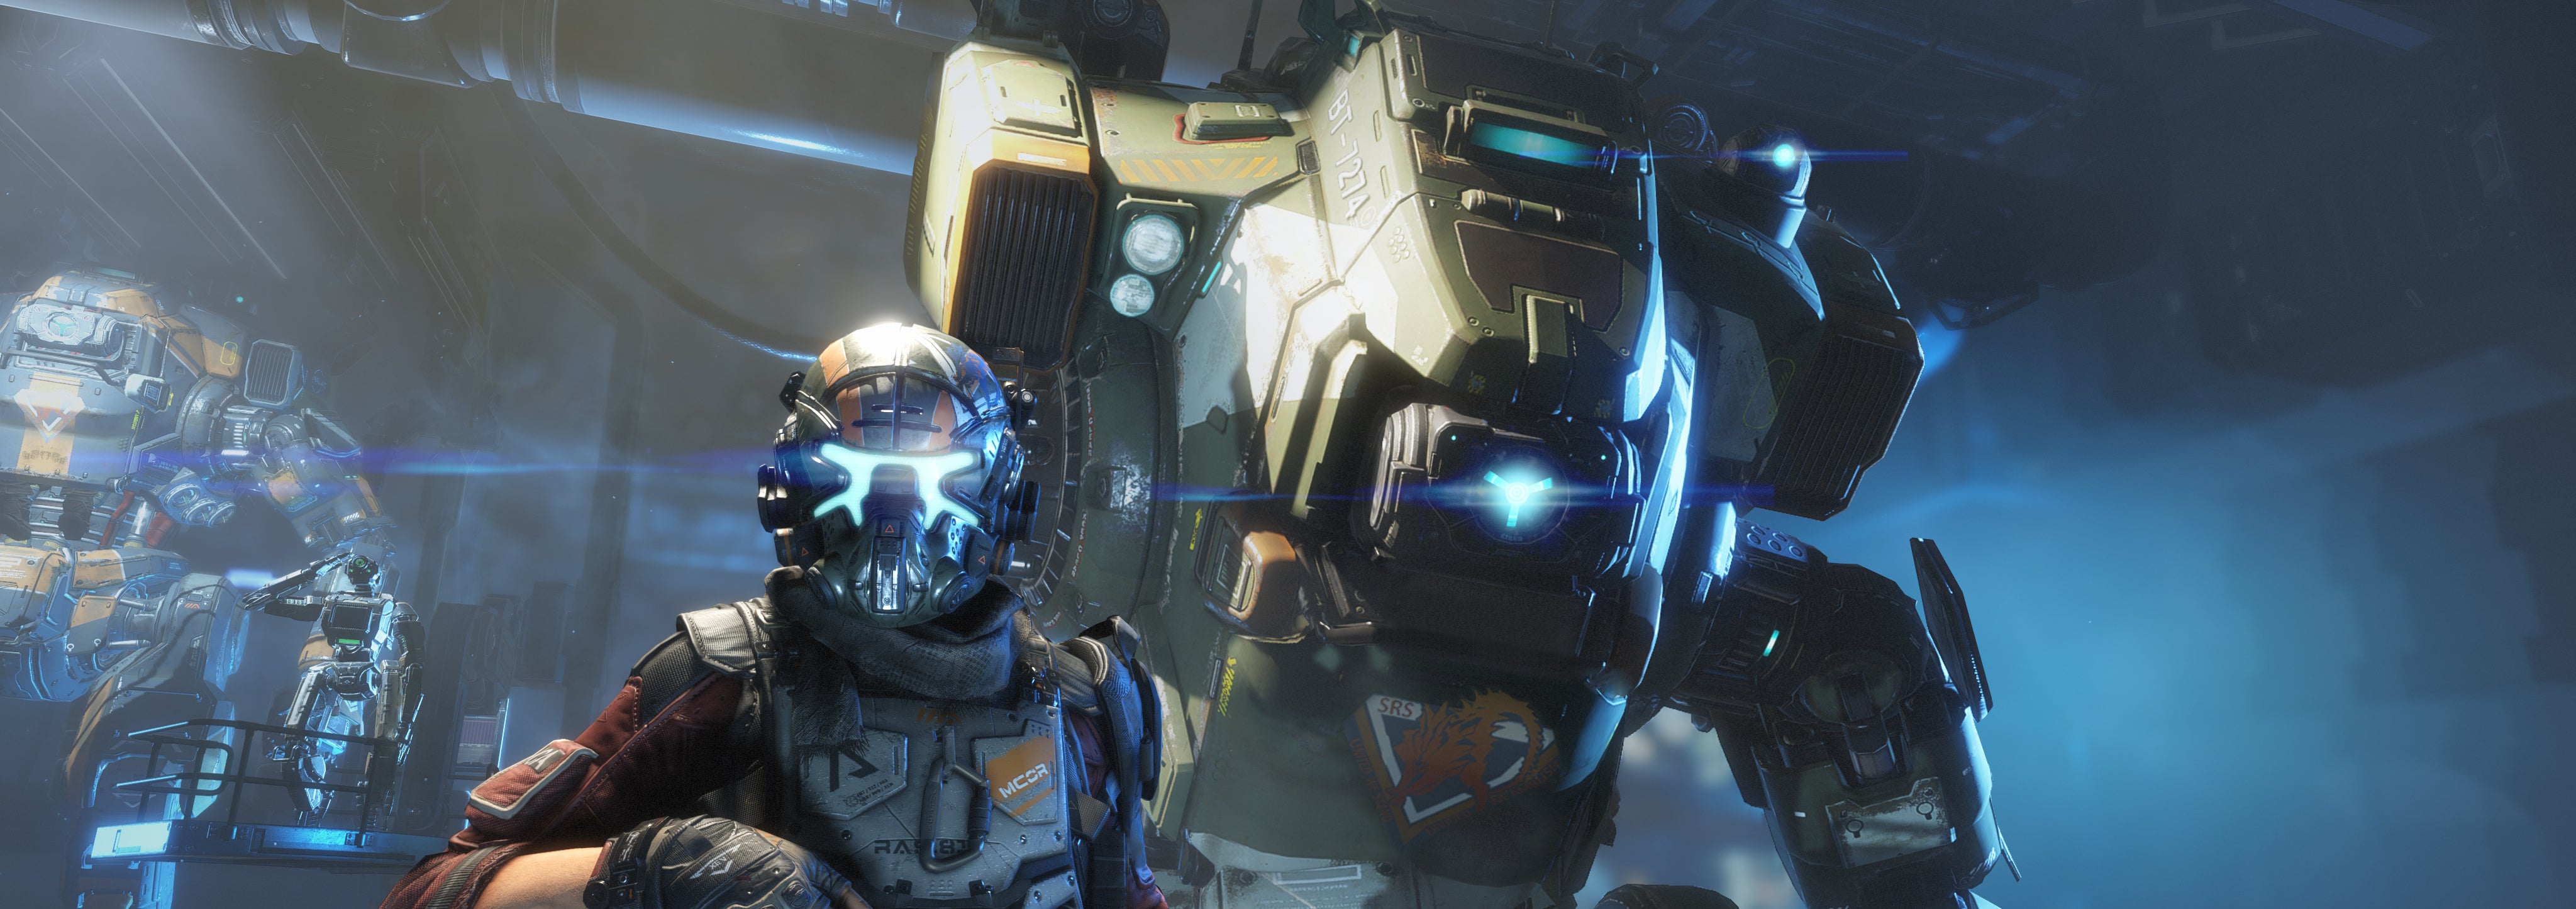 Image for Titanfall 2 PS4 Review: Mech Friends